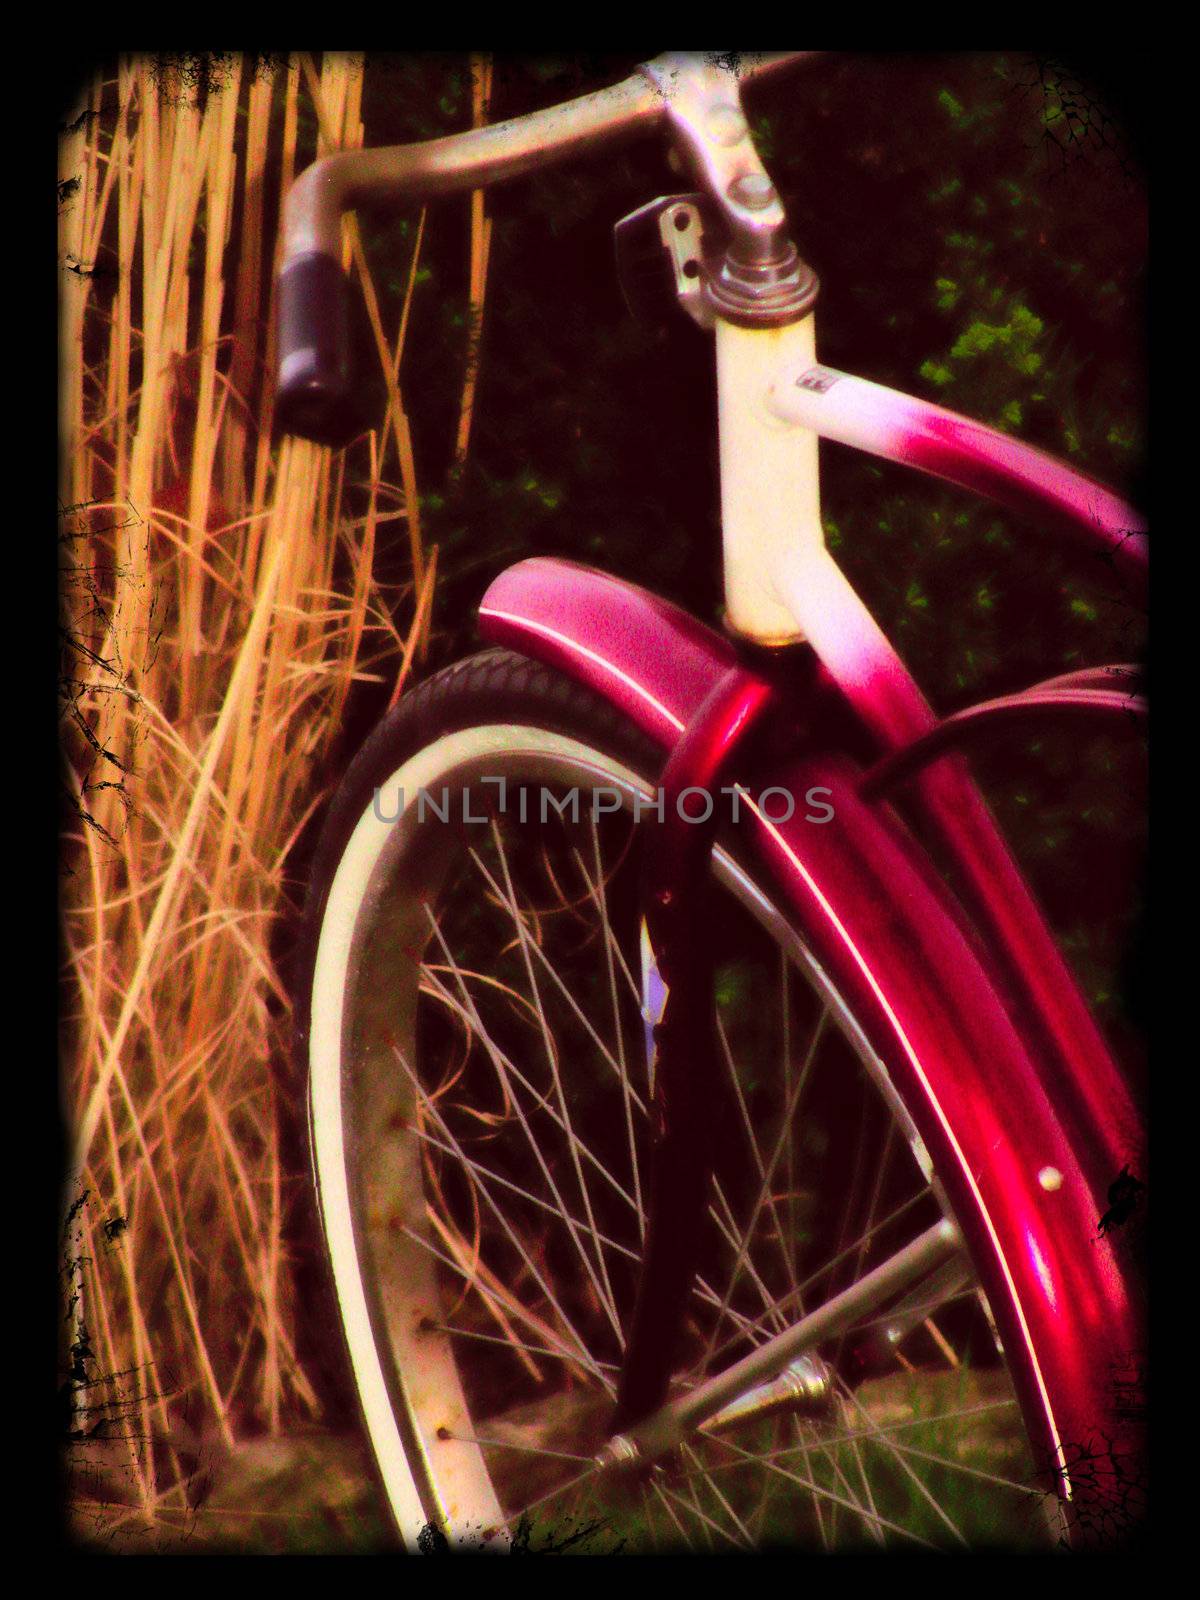 A picture of a vintage style bike.